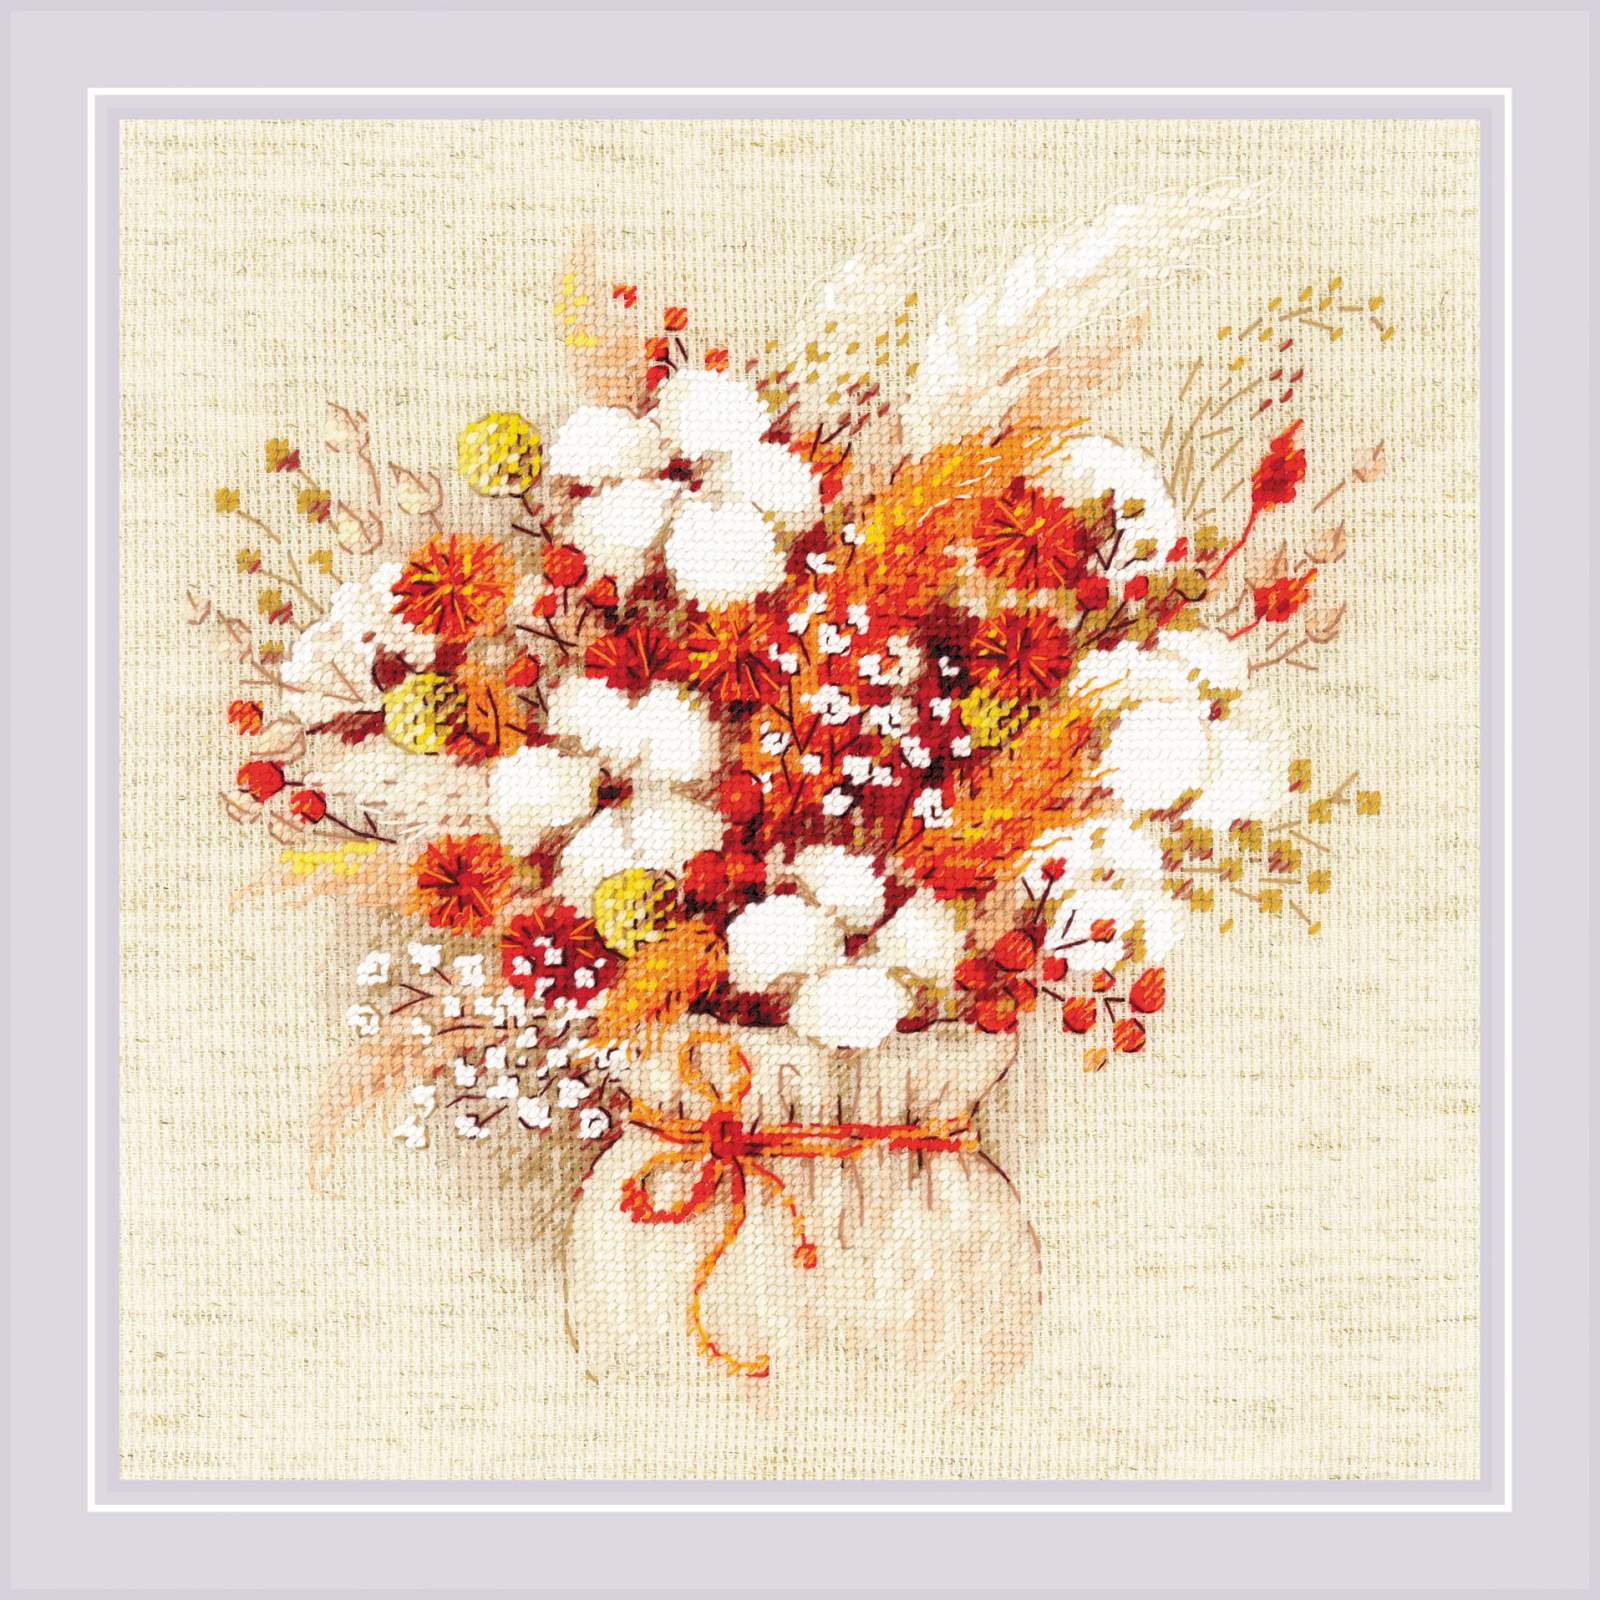 RIOLIS 1773  BOUQUET WITH ASTERS  COUNTED  CROSS STITCH  KIT  14 count 